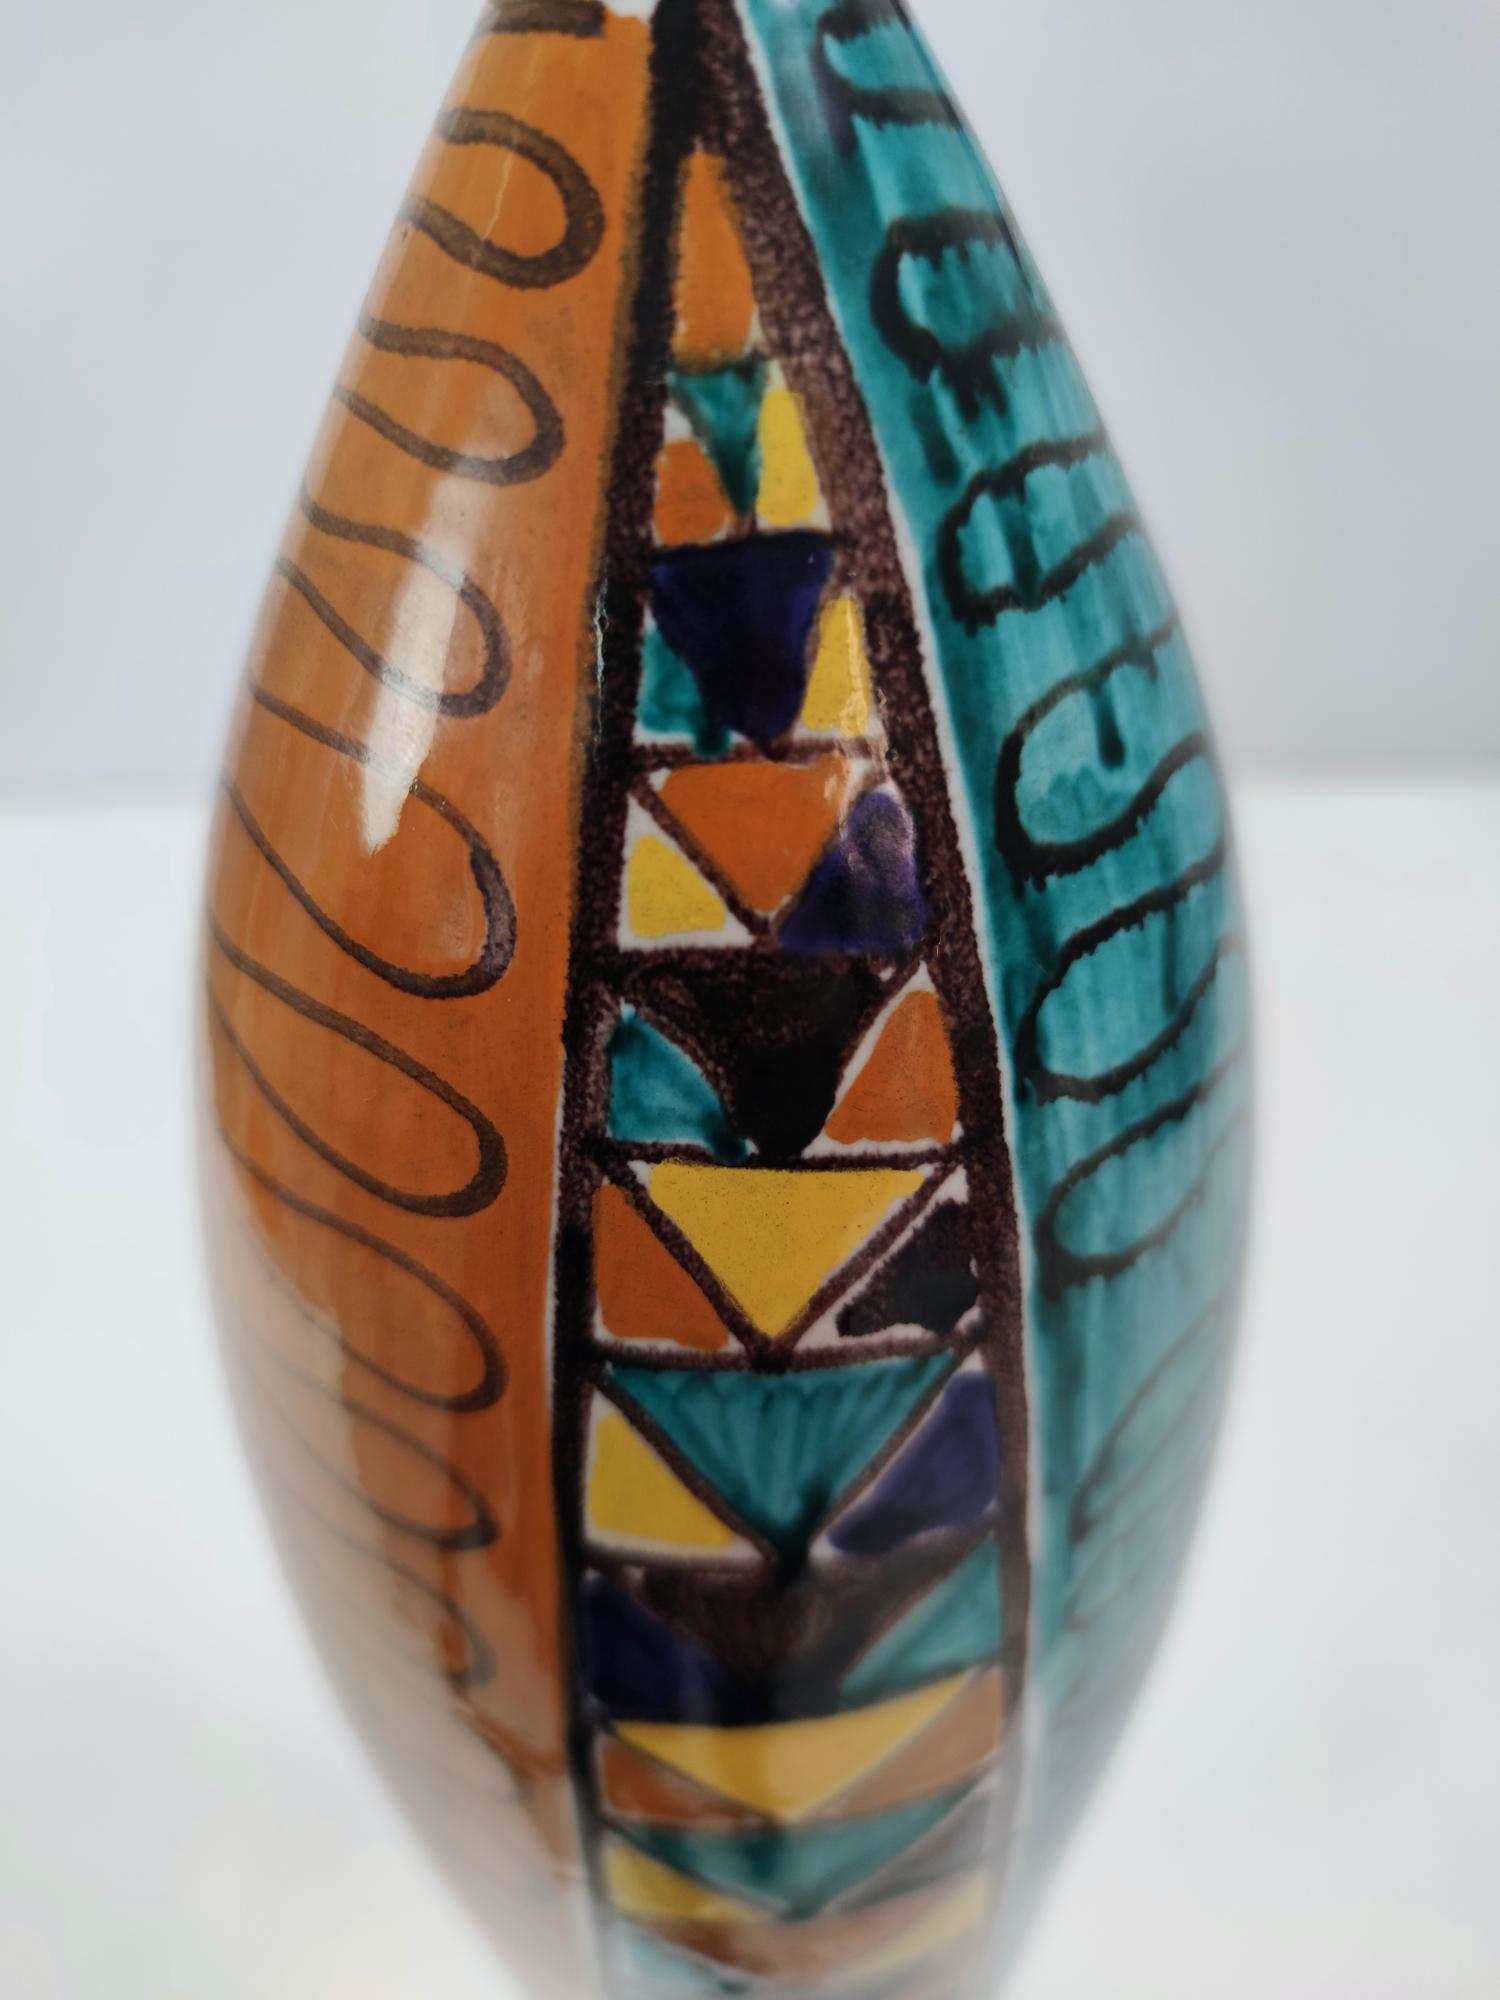 Vintage Multicolored Lacquered Ceramic Vase with Geometric Patterns, Italy For Sale 4